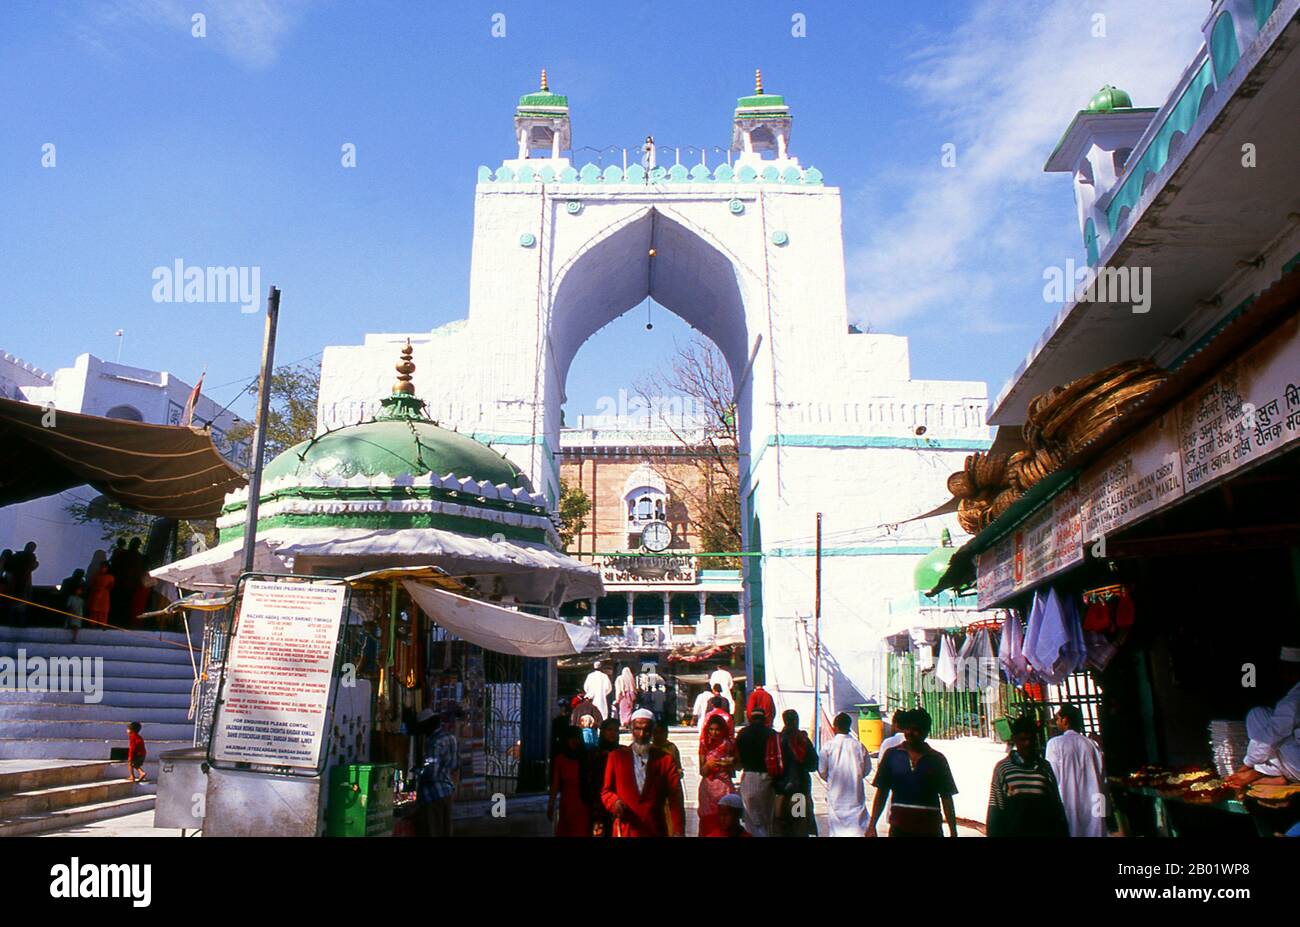 India: Buland Darwaza, the entrance gate to the Dargah Sharif of Sufi saint Moinuddin Chishti, Ajmer, Rajasthan.  Sultan-ul-Hind, Moinuddin Chishti (1141-1230), also known as Gharīb Nawāz ('Benefactor of the Poor'), was the most famous Sufi saint of the Chishti Order of the Indian Subcontinent. He introduced and established the order in South Asia.  Ajmer (Sanskrit: Ajayameru) was founded in the late 7th century CE by Dushyant Chauhan. The Chauhan dynasty ruled Ajmer in spite of repeated invasions by Turkic marauders from Central Asia across the north of India. Stock Photo